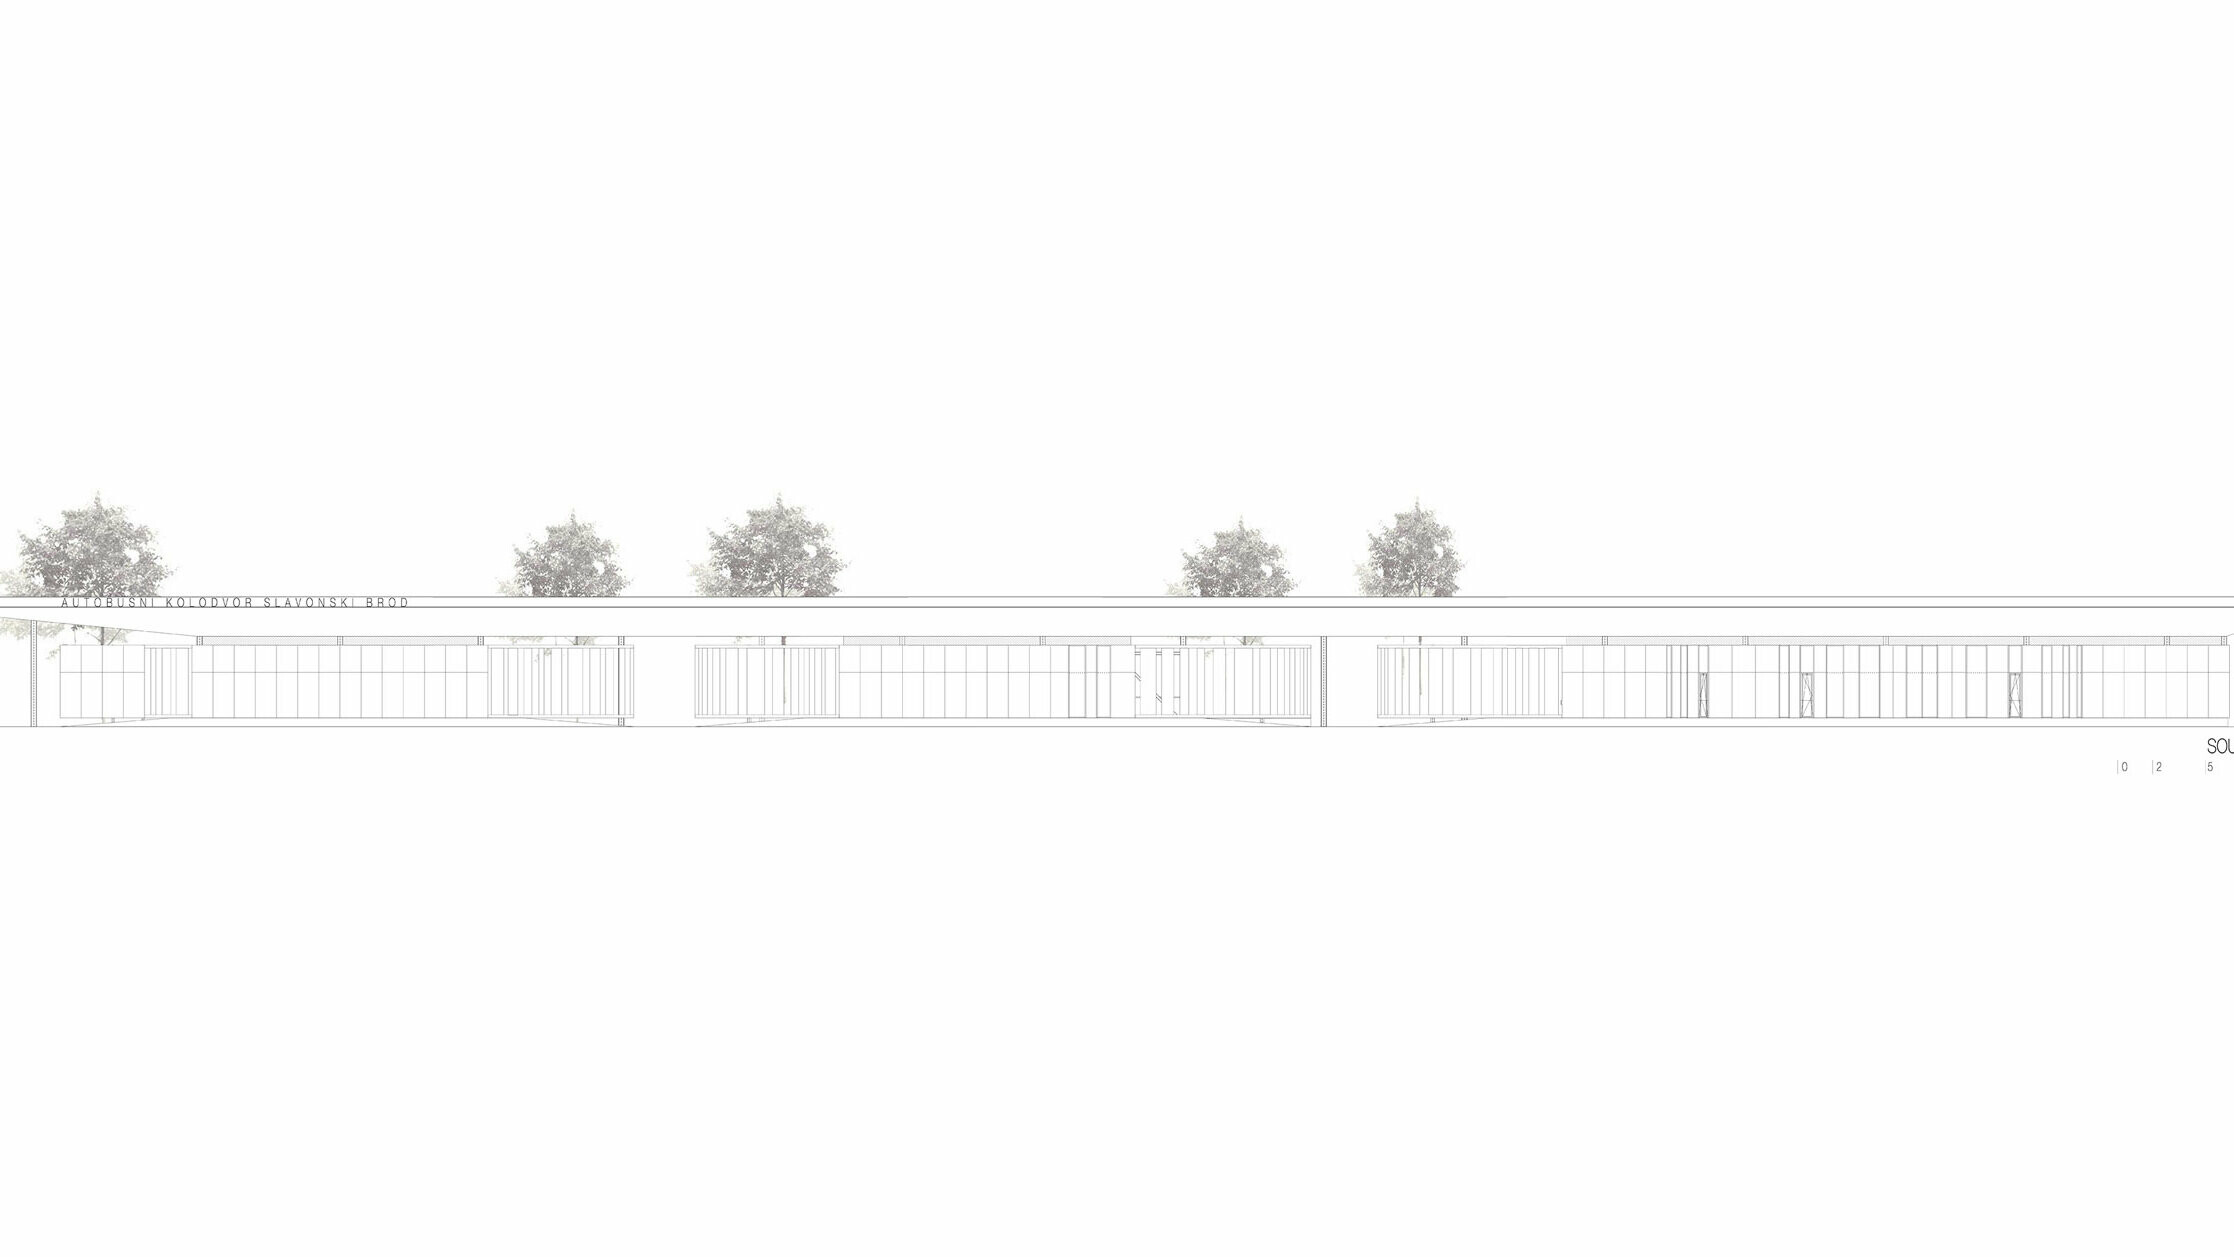 The drawing shows the southern view of the "Autobusni Kolodvor Slavonski Brod" bus stop in Croatia. The façade consists of a long, horizontal structure with large glass surfaces and slender columns. The white Prefalz roof from PREFA stretches the entire length of the building and is punctuated by several trees protruding from the roof. The lettering "Autobusni Kolodvor Slavonski Brod" is clearly visible on the roof. The south view emphasises the modern and clear architecture of the bus stop, which creates a harmonious and functional environment through the combination of glass, aluminium and integrated green spaces.